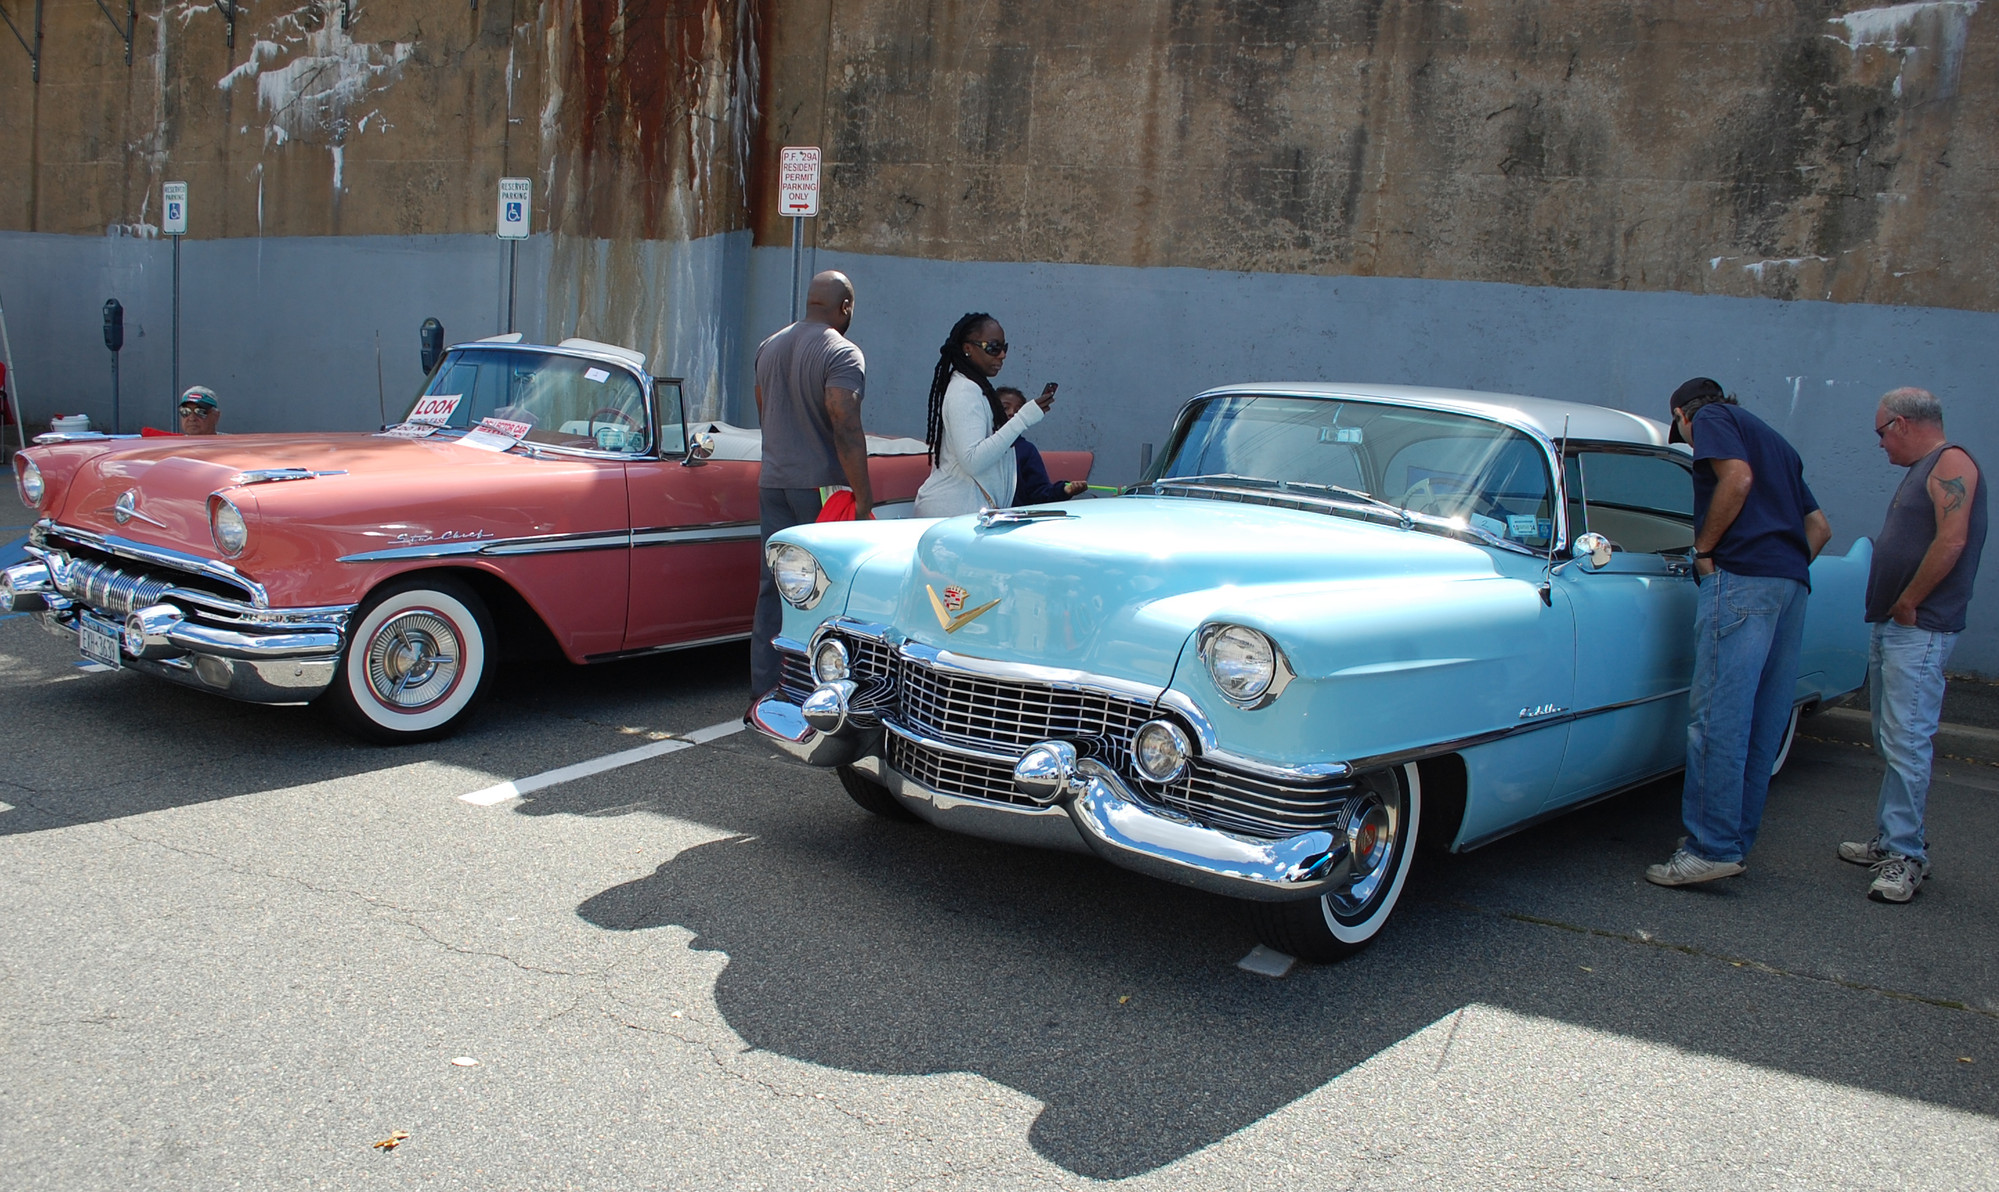 One addition to the fair this year was a classic car show in the Long Island Rail Road parking lot.